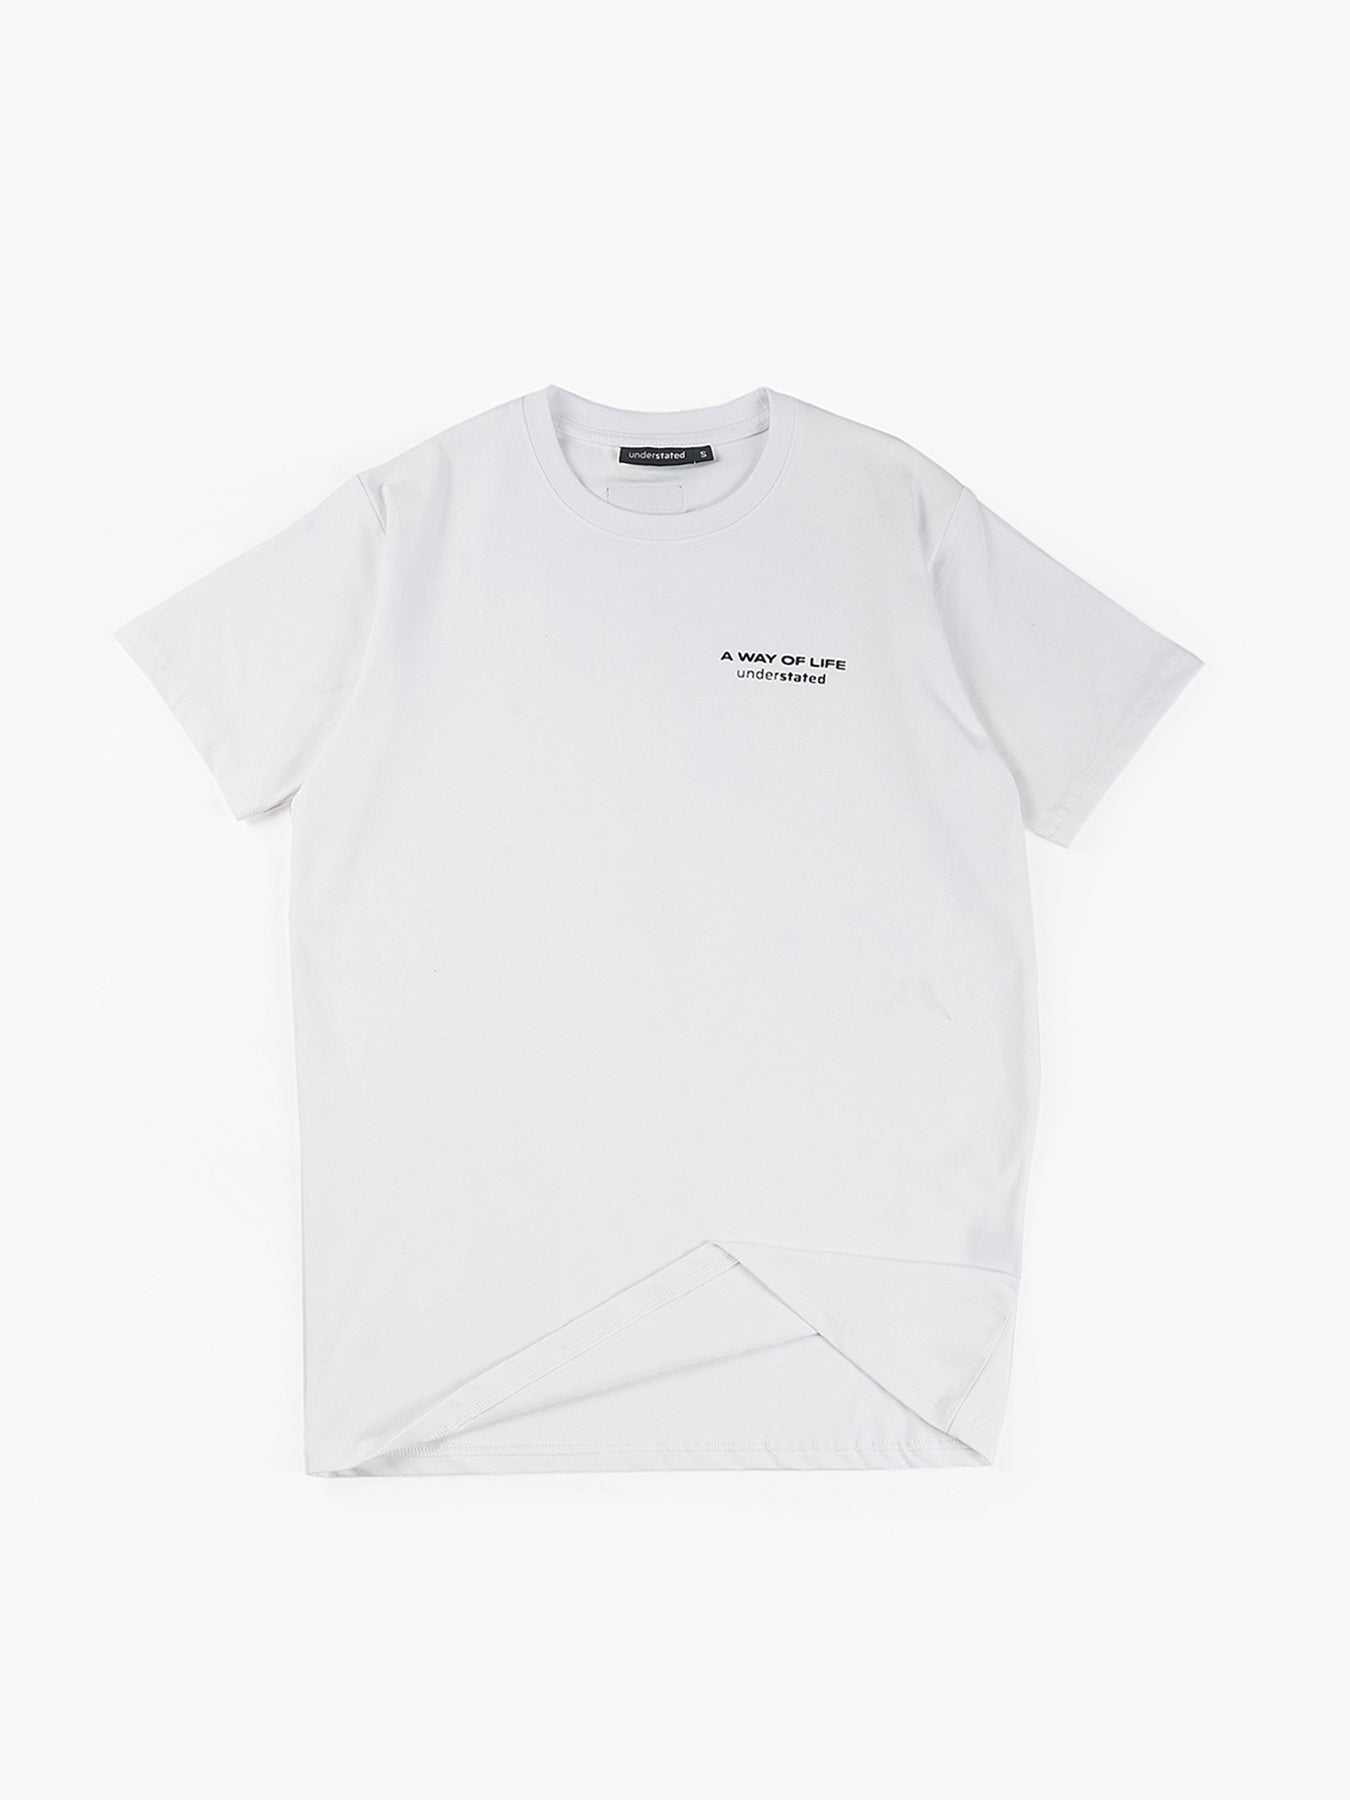 A WAY OF LIFE T-Shirt / Oversized